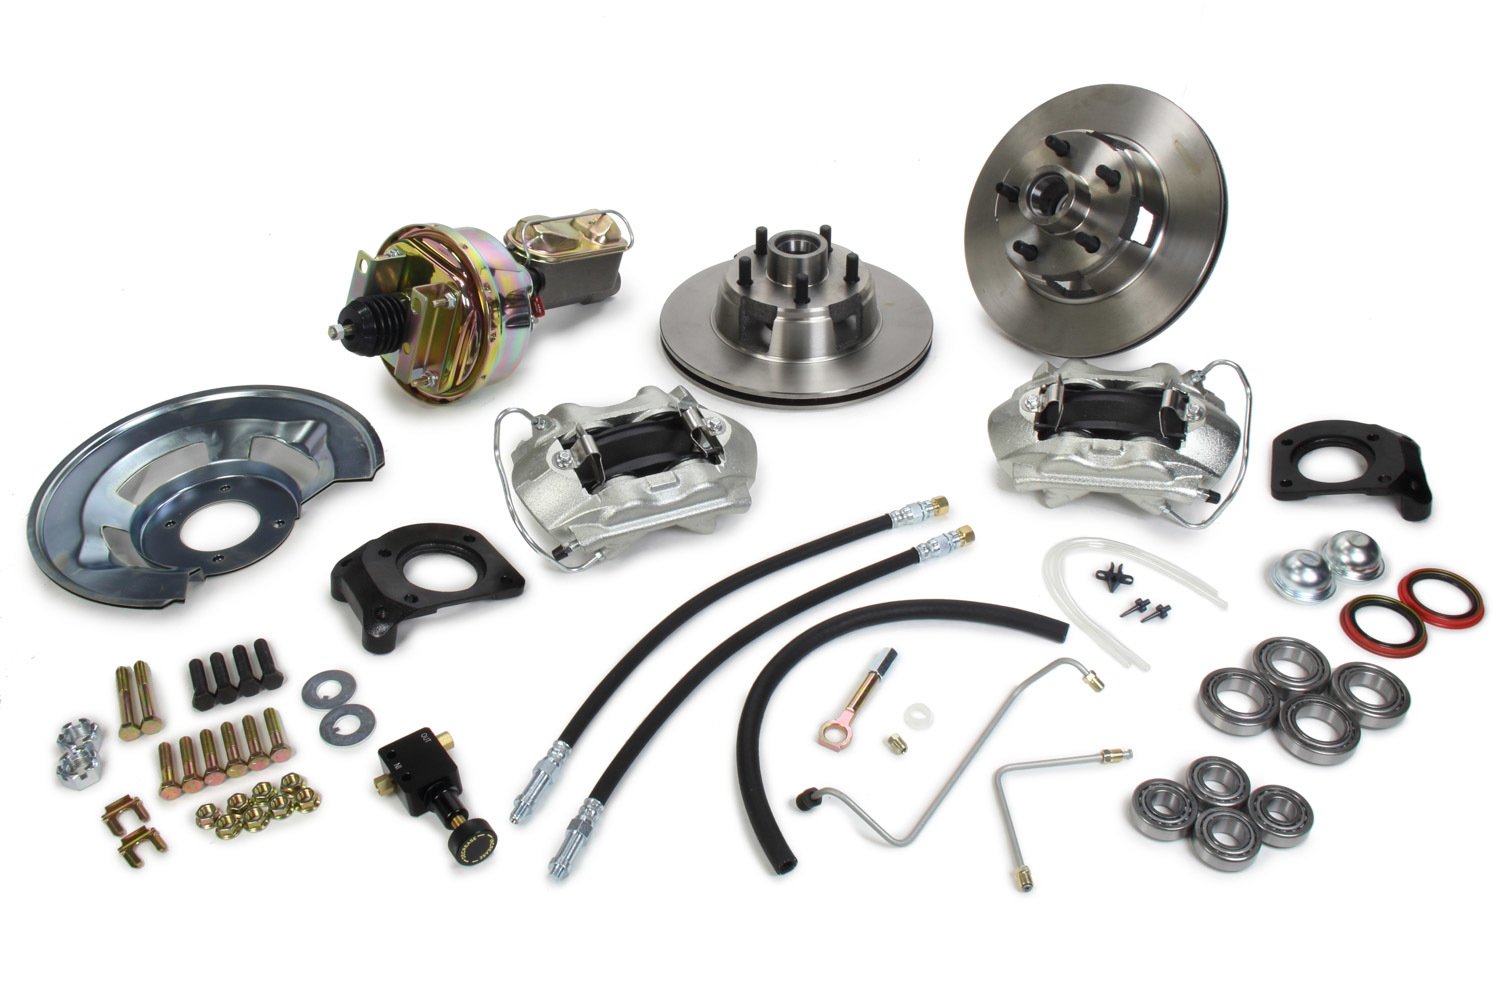 The Right Stuff ZDC6405 Brake System, Street Series, Disc Conversion, Front, 1 Piston Caliper, 11 in Rotors, Offset Hat, Iron, Natural, Ford Mustang 1964-66, Kit